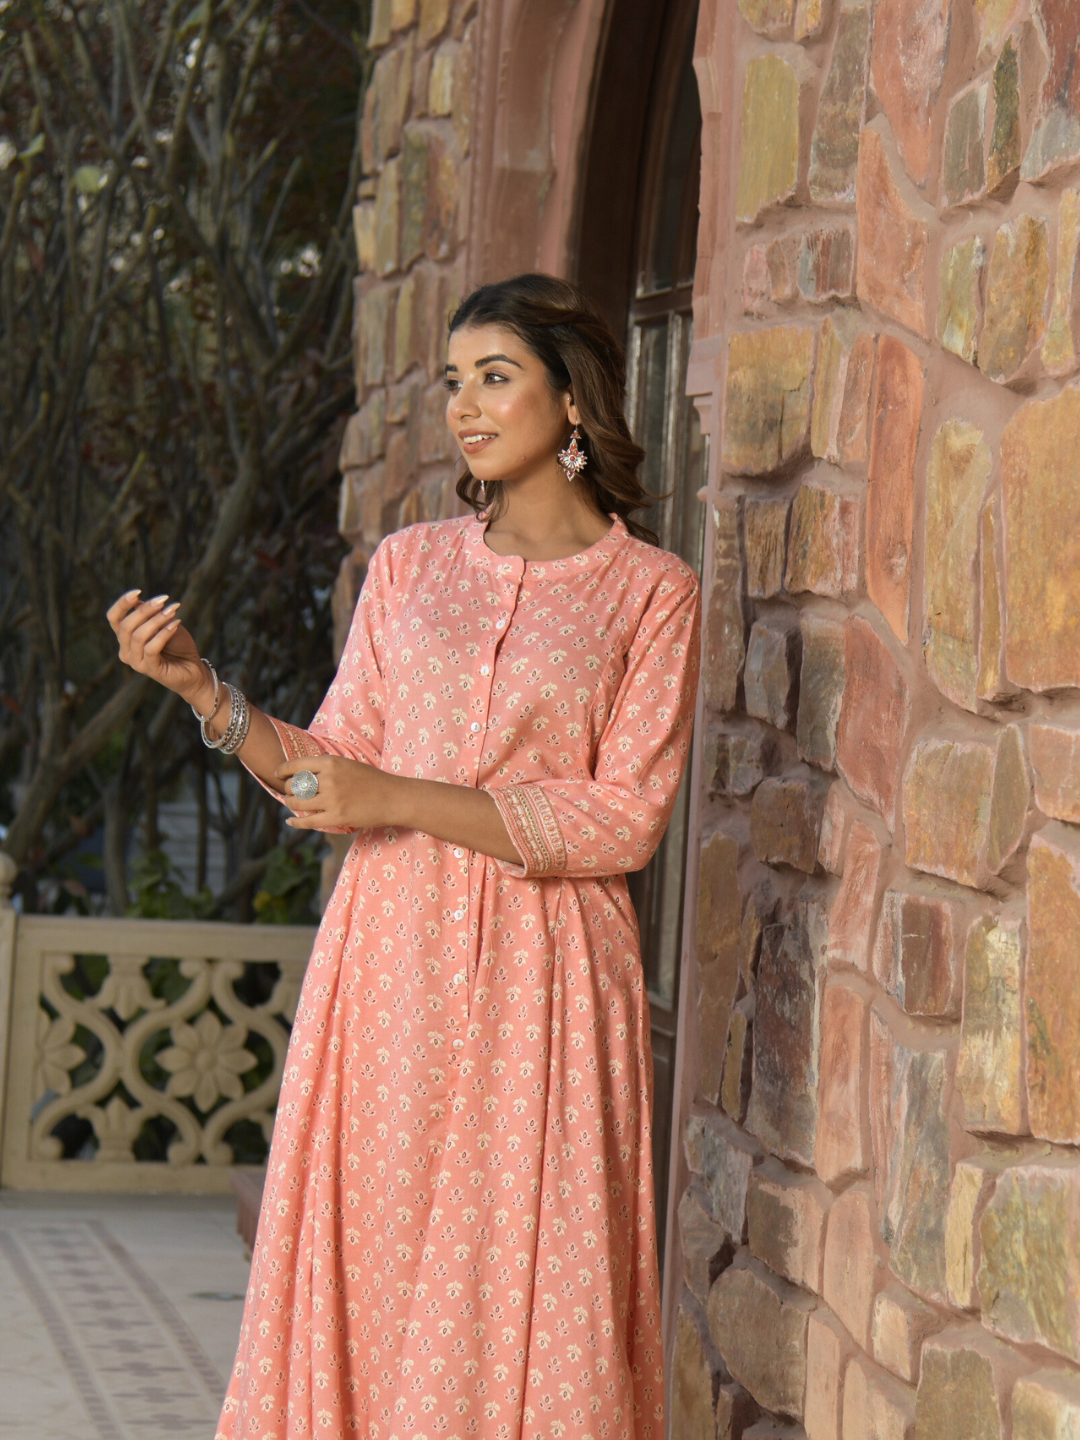 Peach Floral Print Button-Down Kurta with Embroidery Border